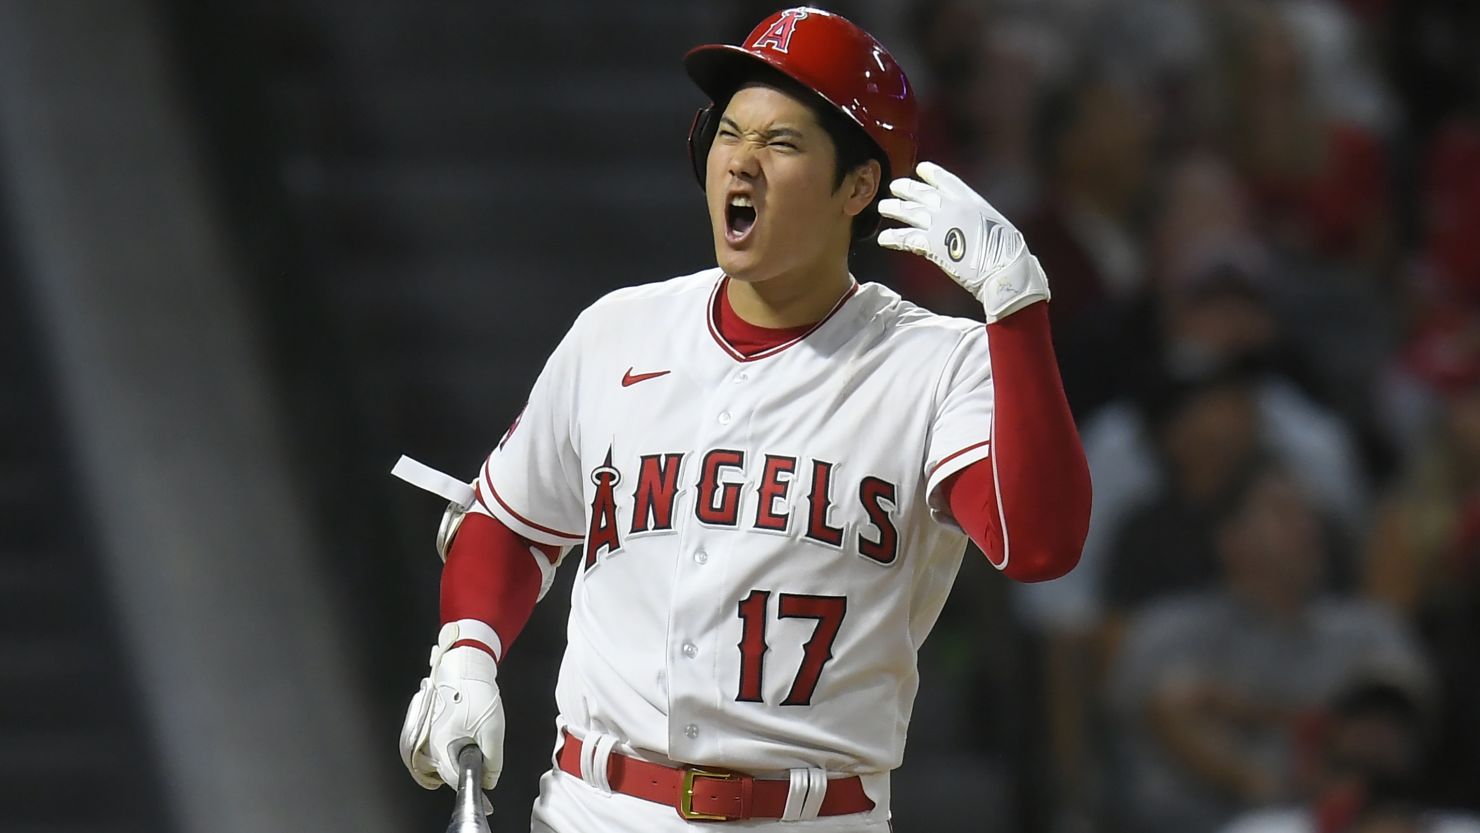 Shohei Ohtani reacts to hitting a foul ball while playing against the Houston Astros.